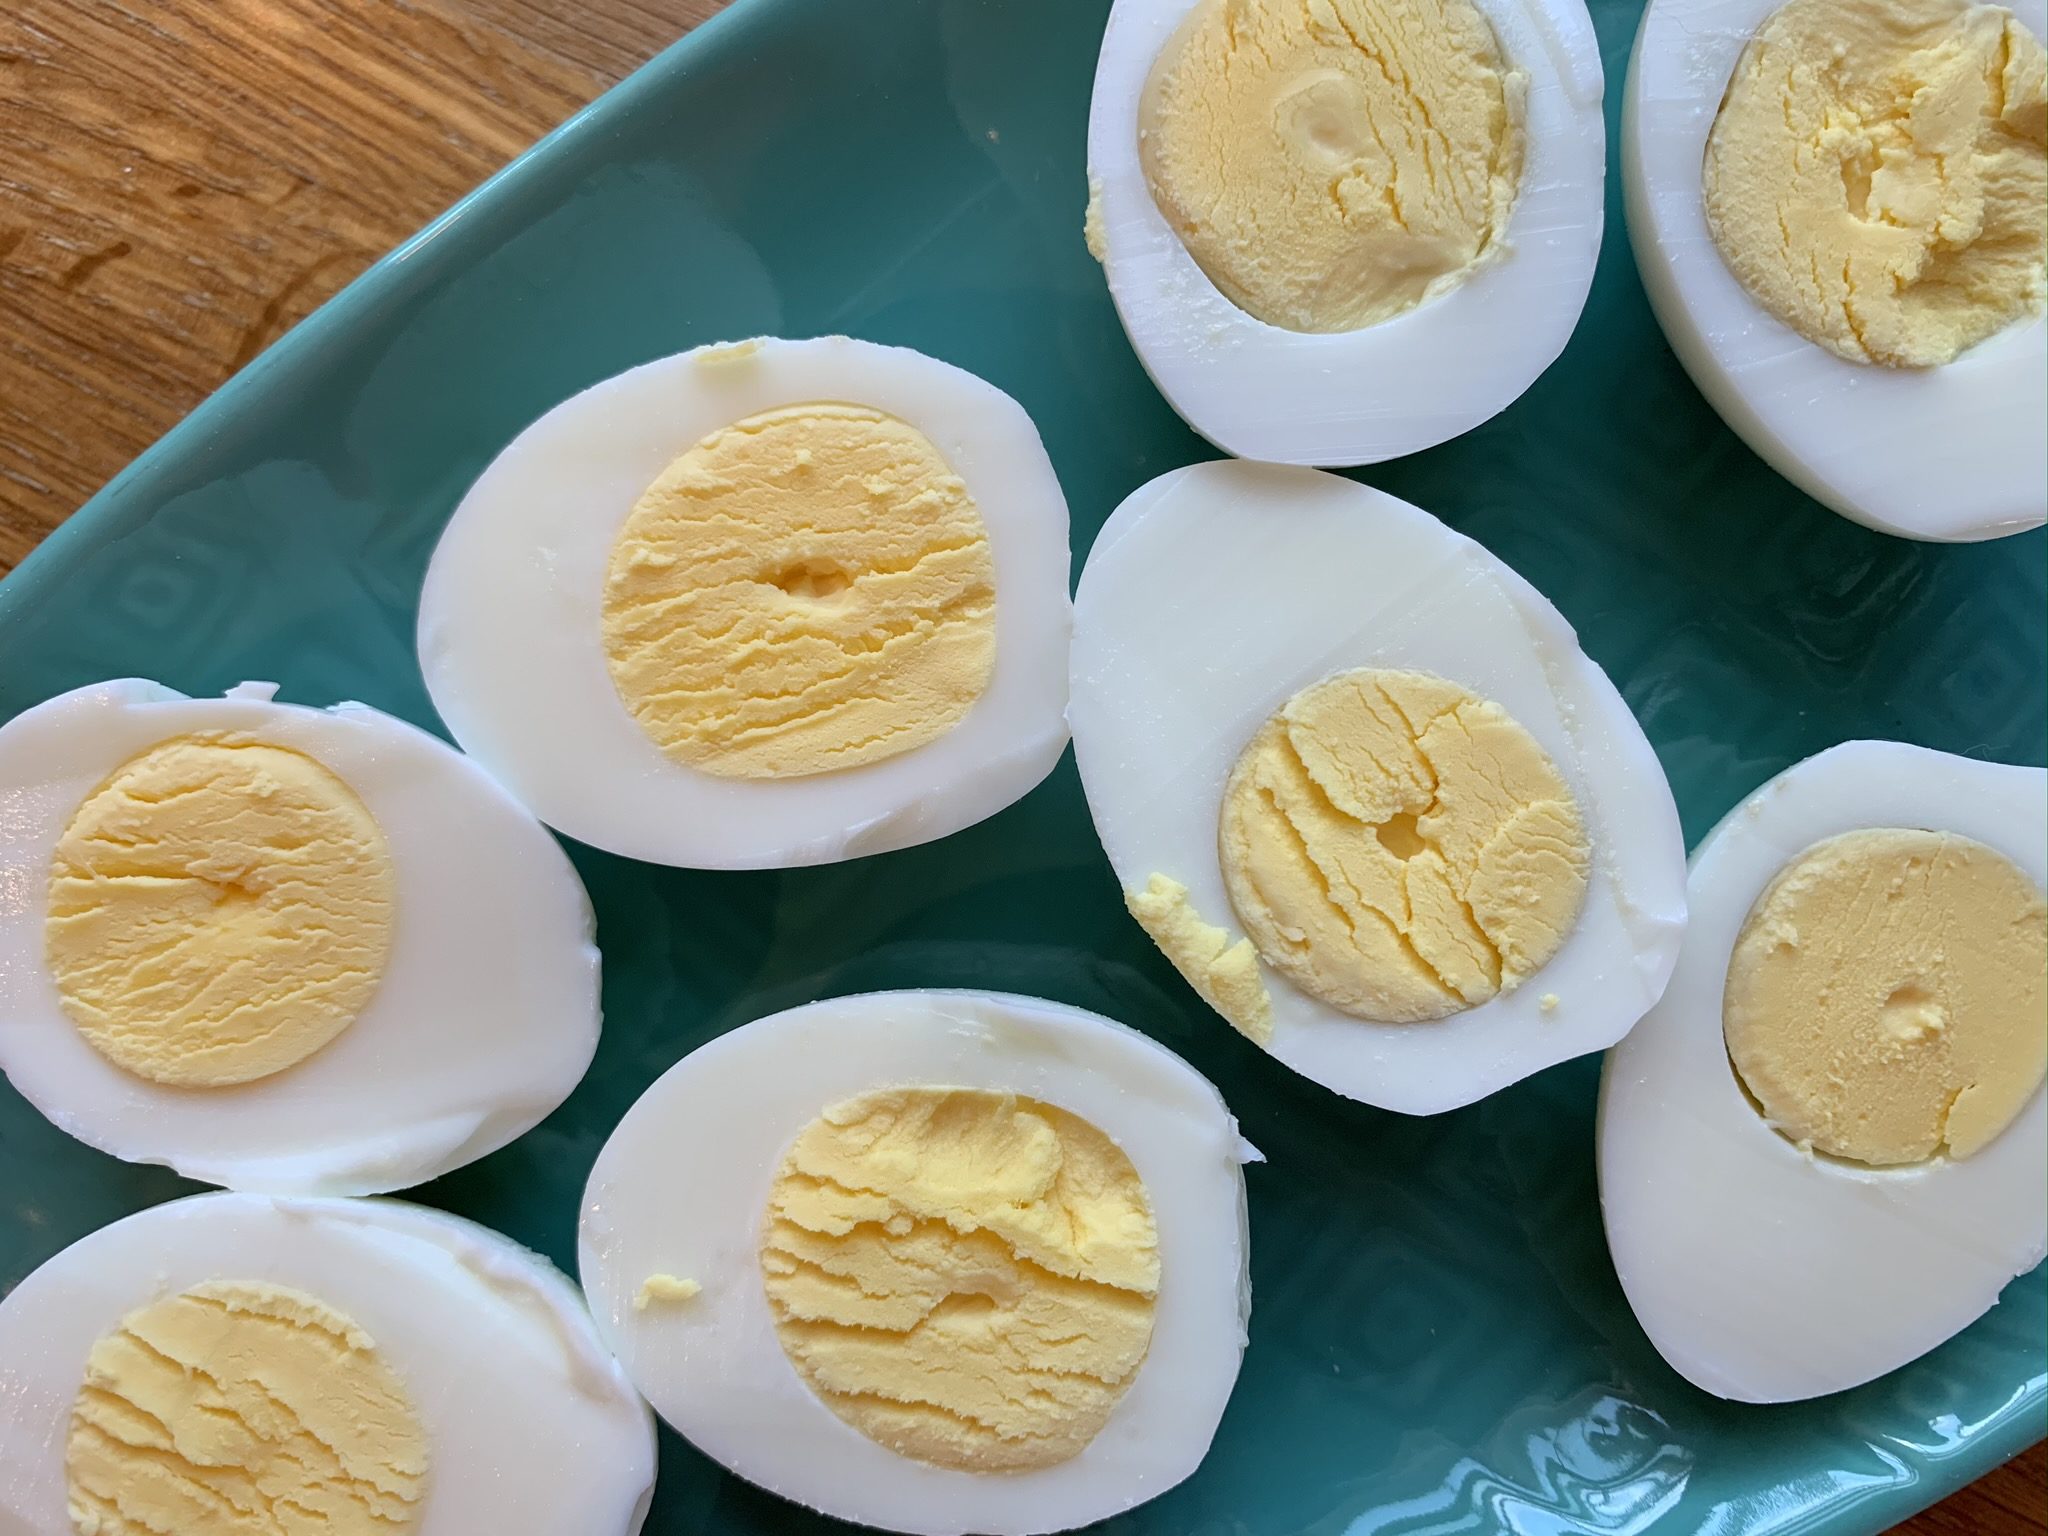 Hard boiled eggs, two ways